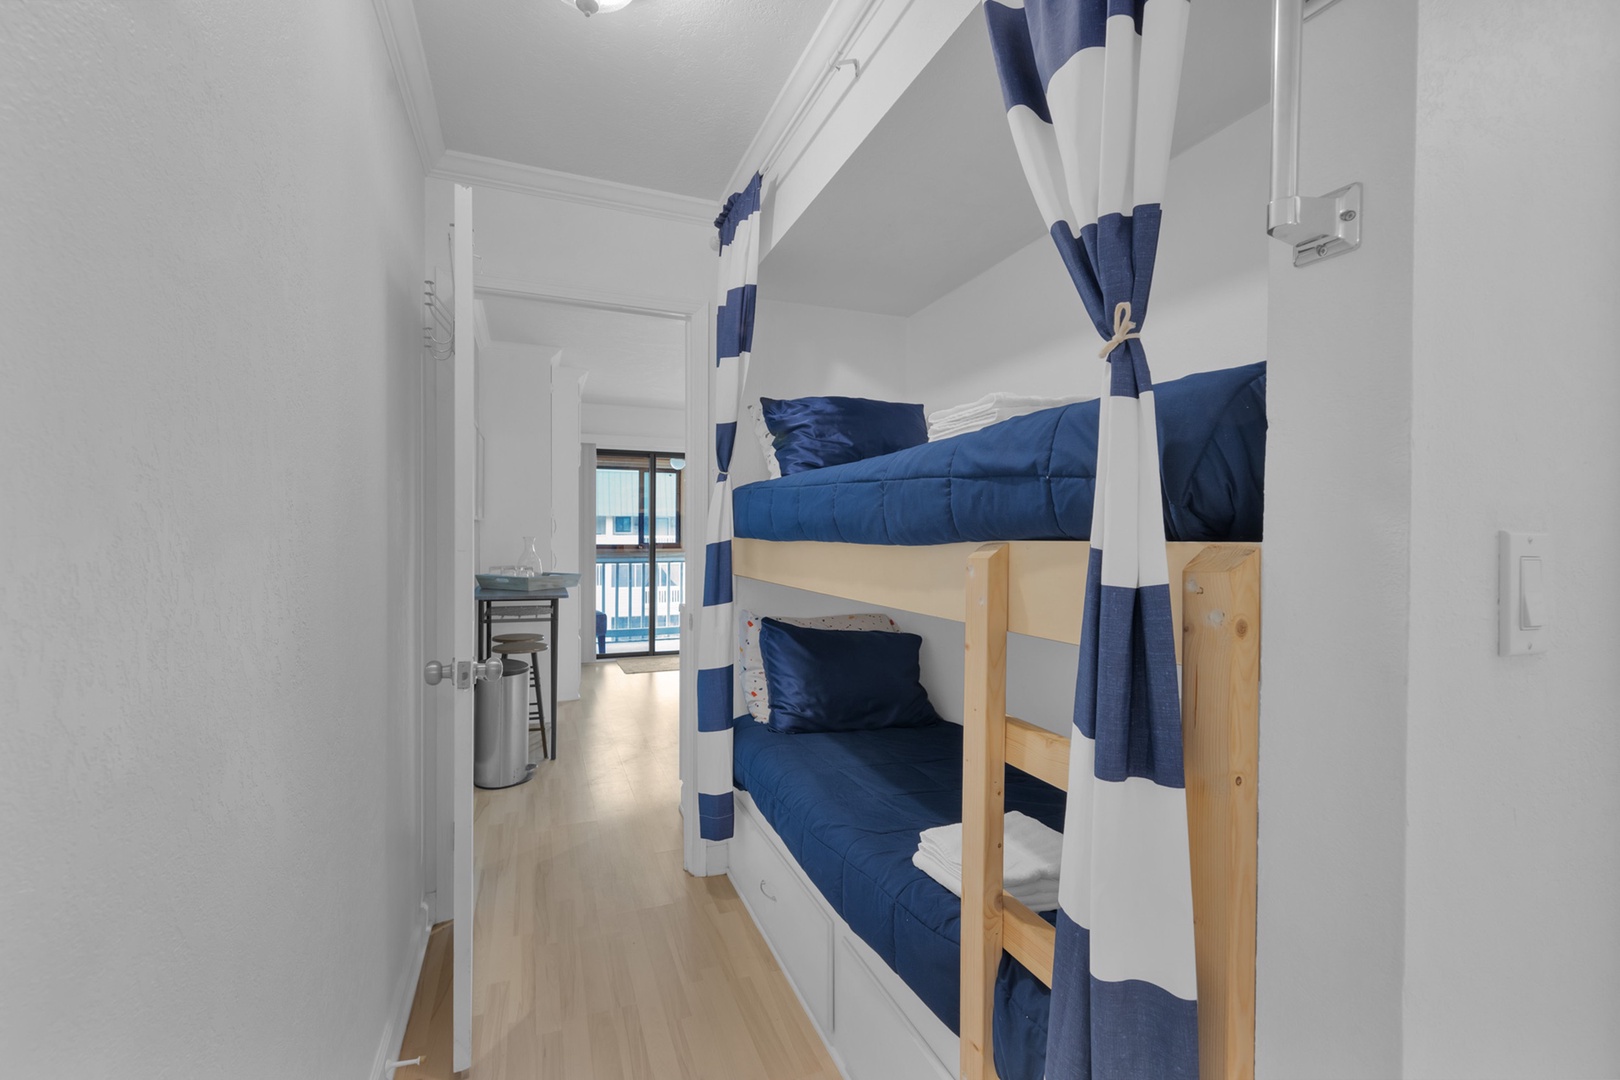 The cozy sleeping nook showcases twin-over-twin bunkbeds